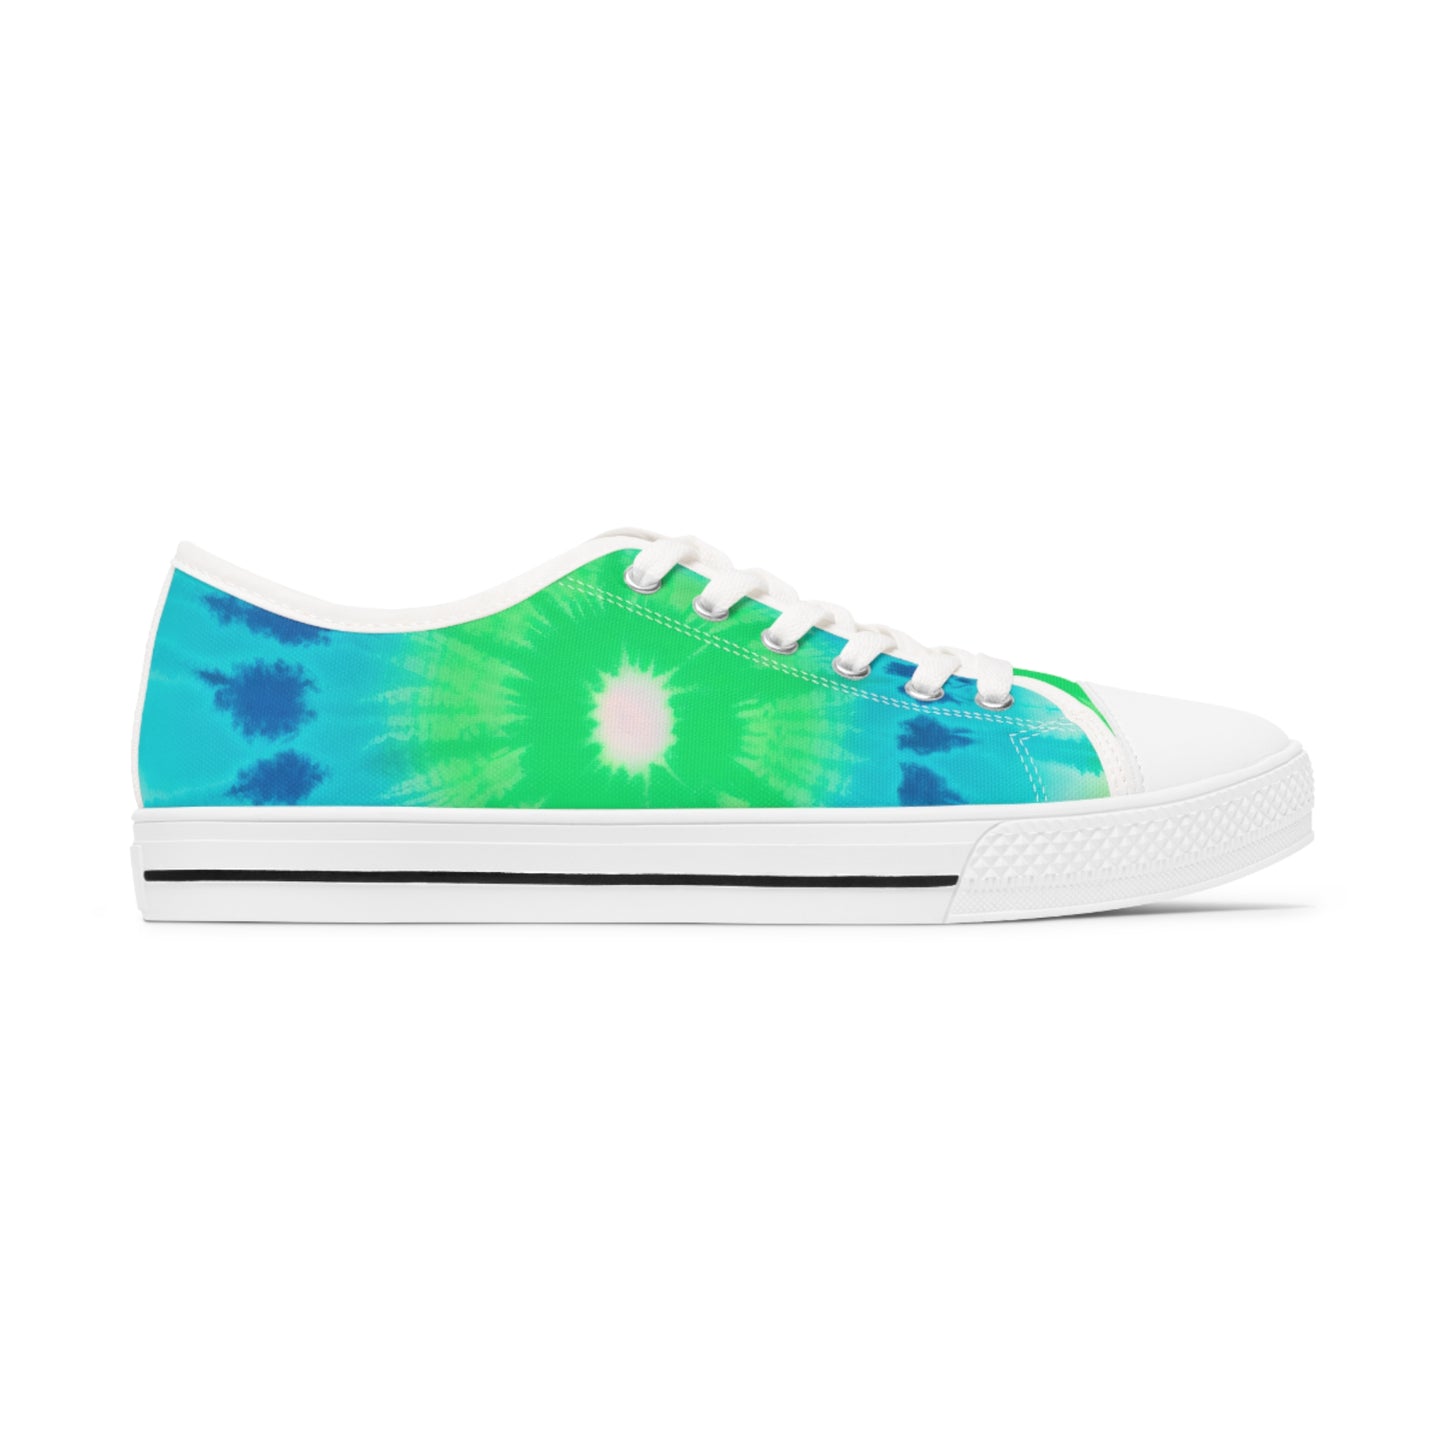 Surface Beach Volleyball Club Tie Dye Women's Low Top Sneakers